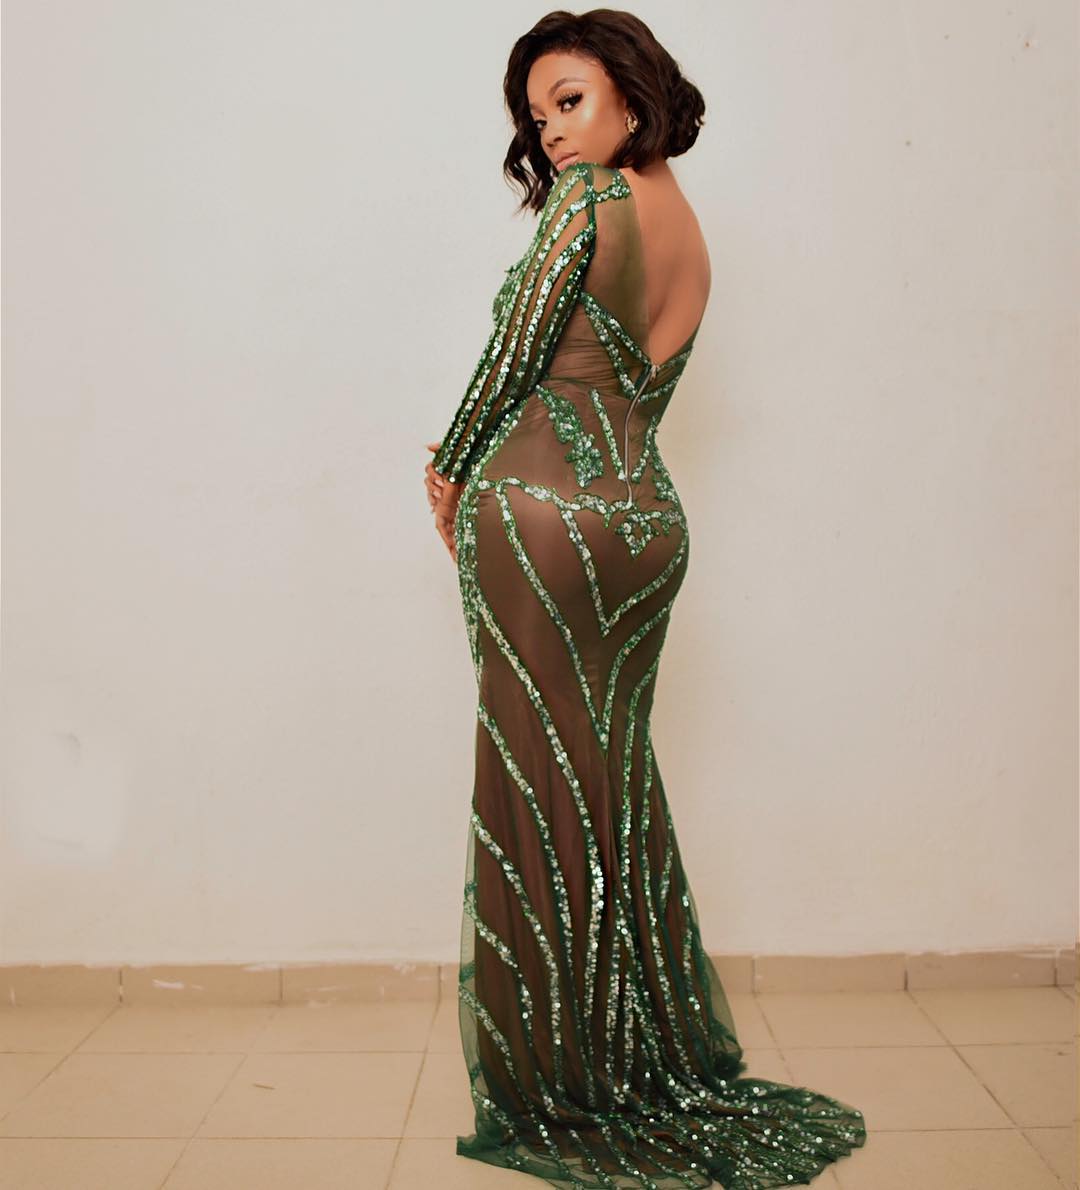 "I would have stayed for the Kids" -- Toke Makinwa